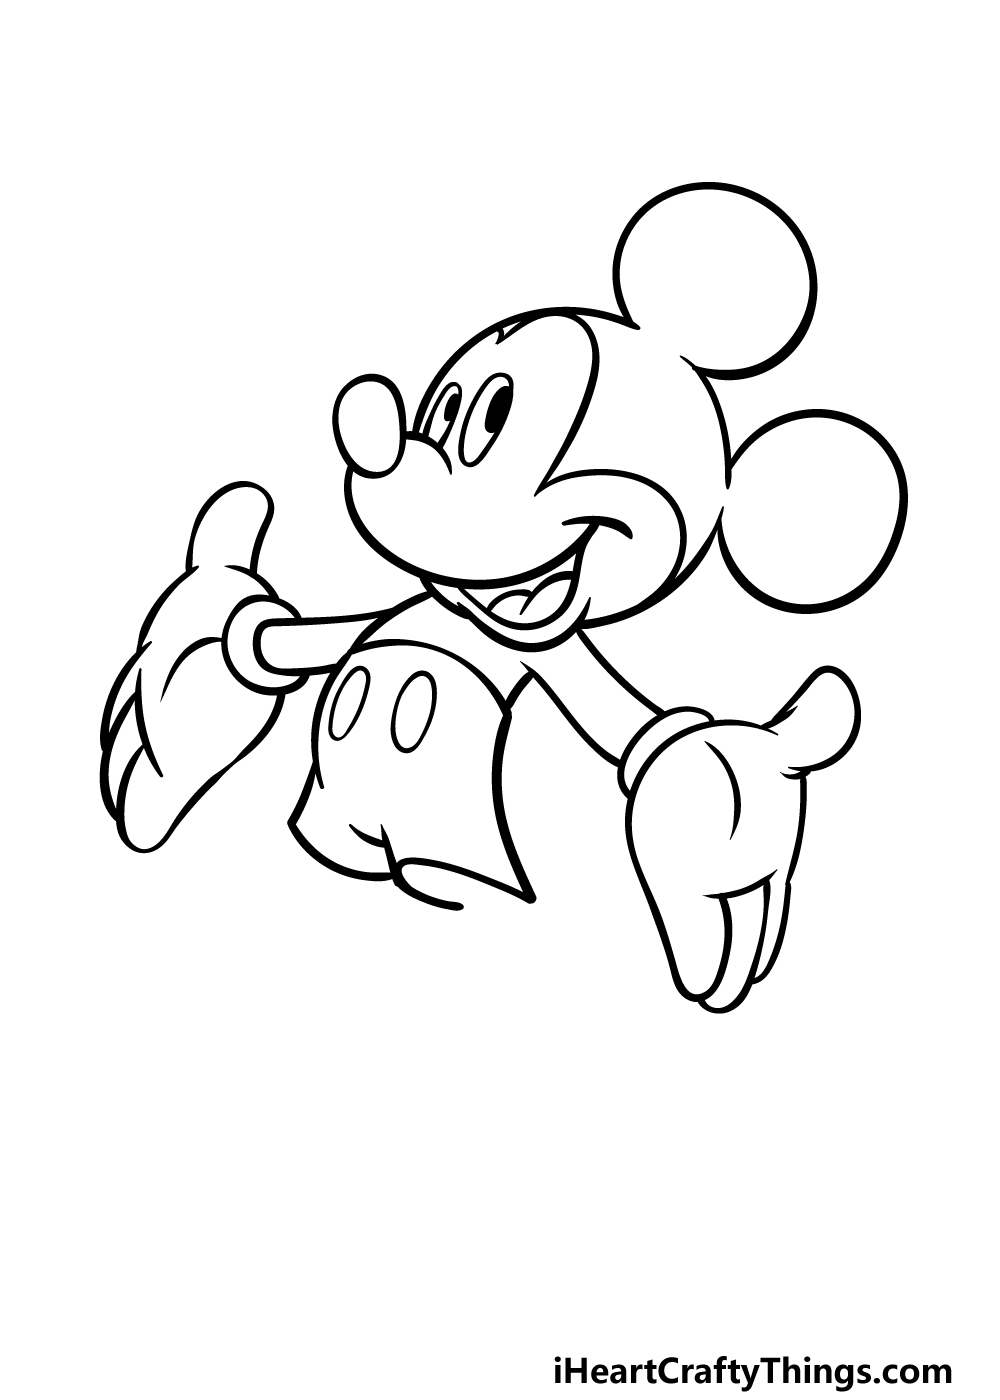 25 Mickey Mouse Drawing Ideas - Draw Mickey Mouse-vachngandaiphat.com.vn